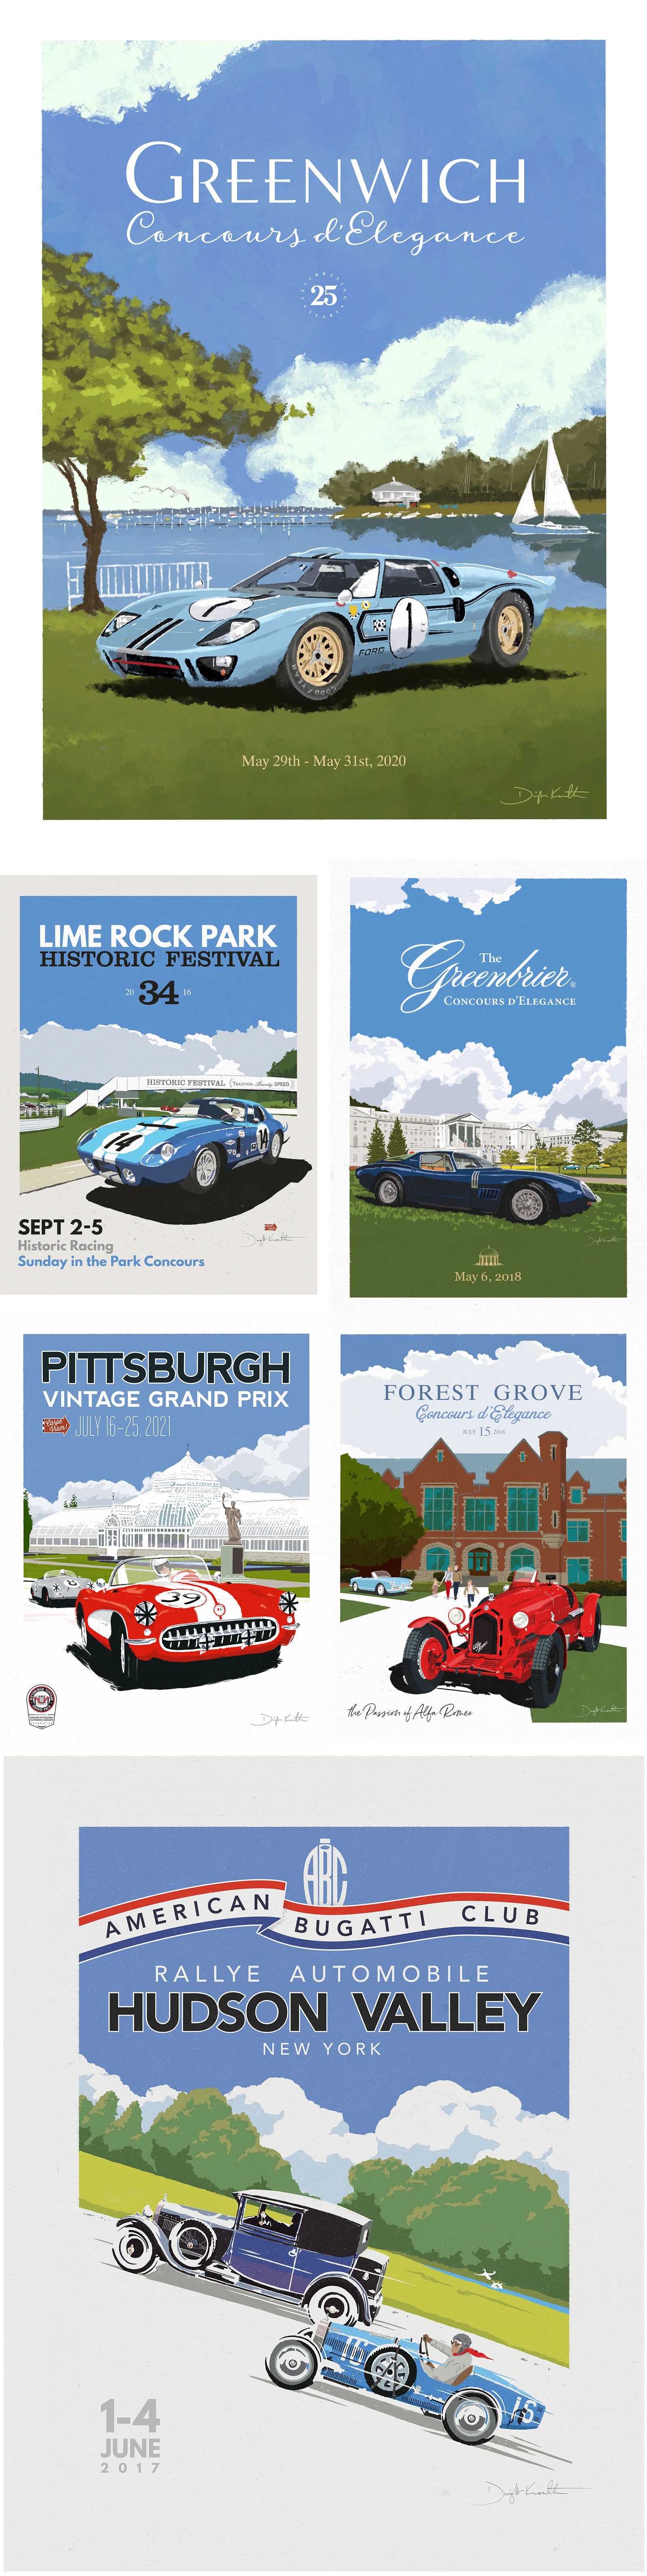 Dwight Knowlton Concours Poster Art 2